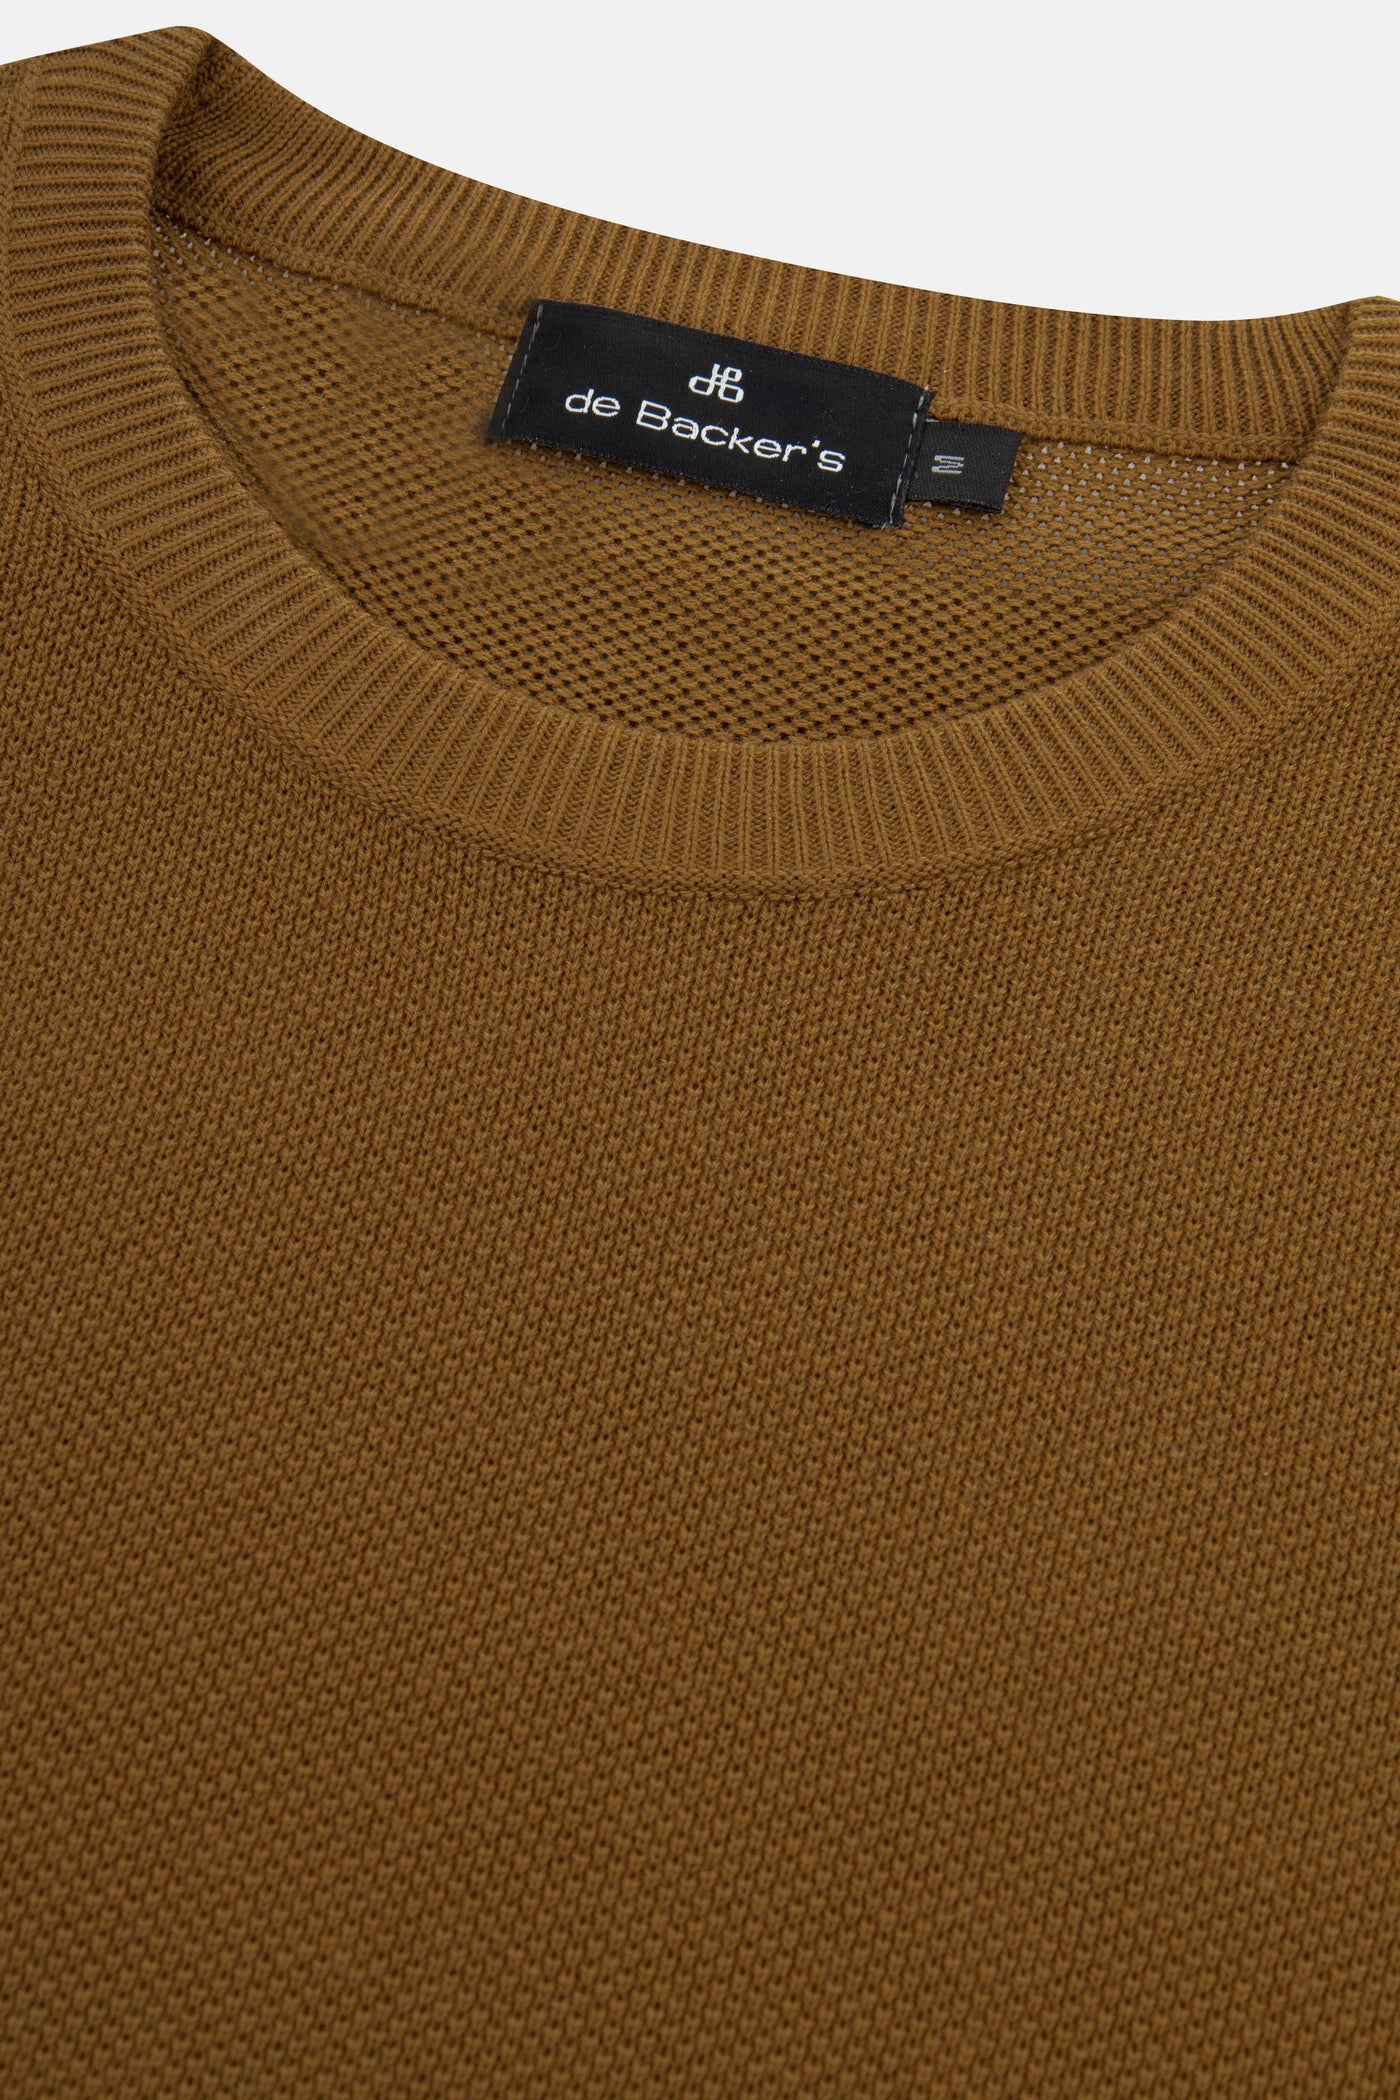 Jacquard Sepia Brown Knitted  Round T Shirt